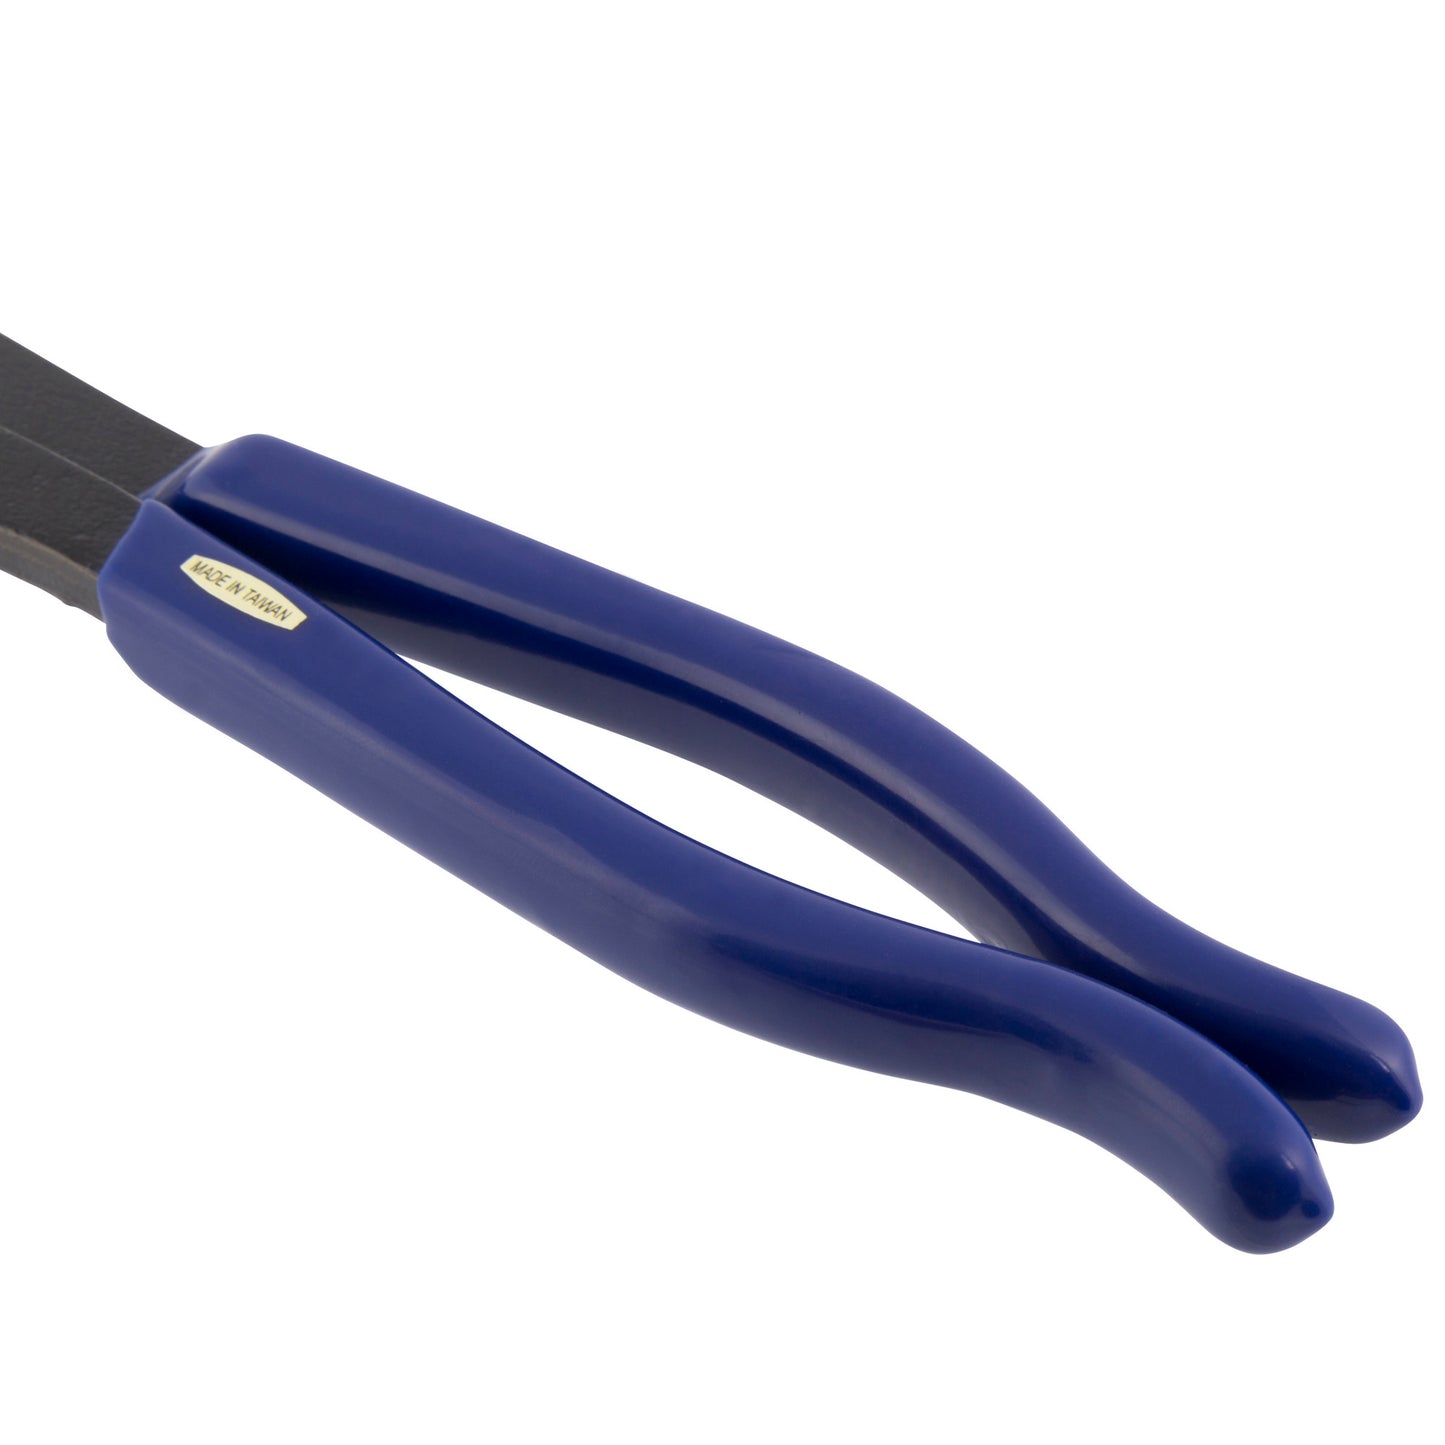 20-inch Large Oil Filter Pliers